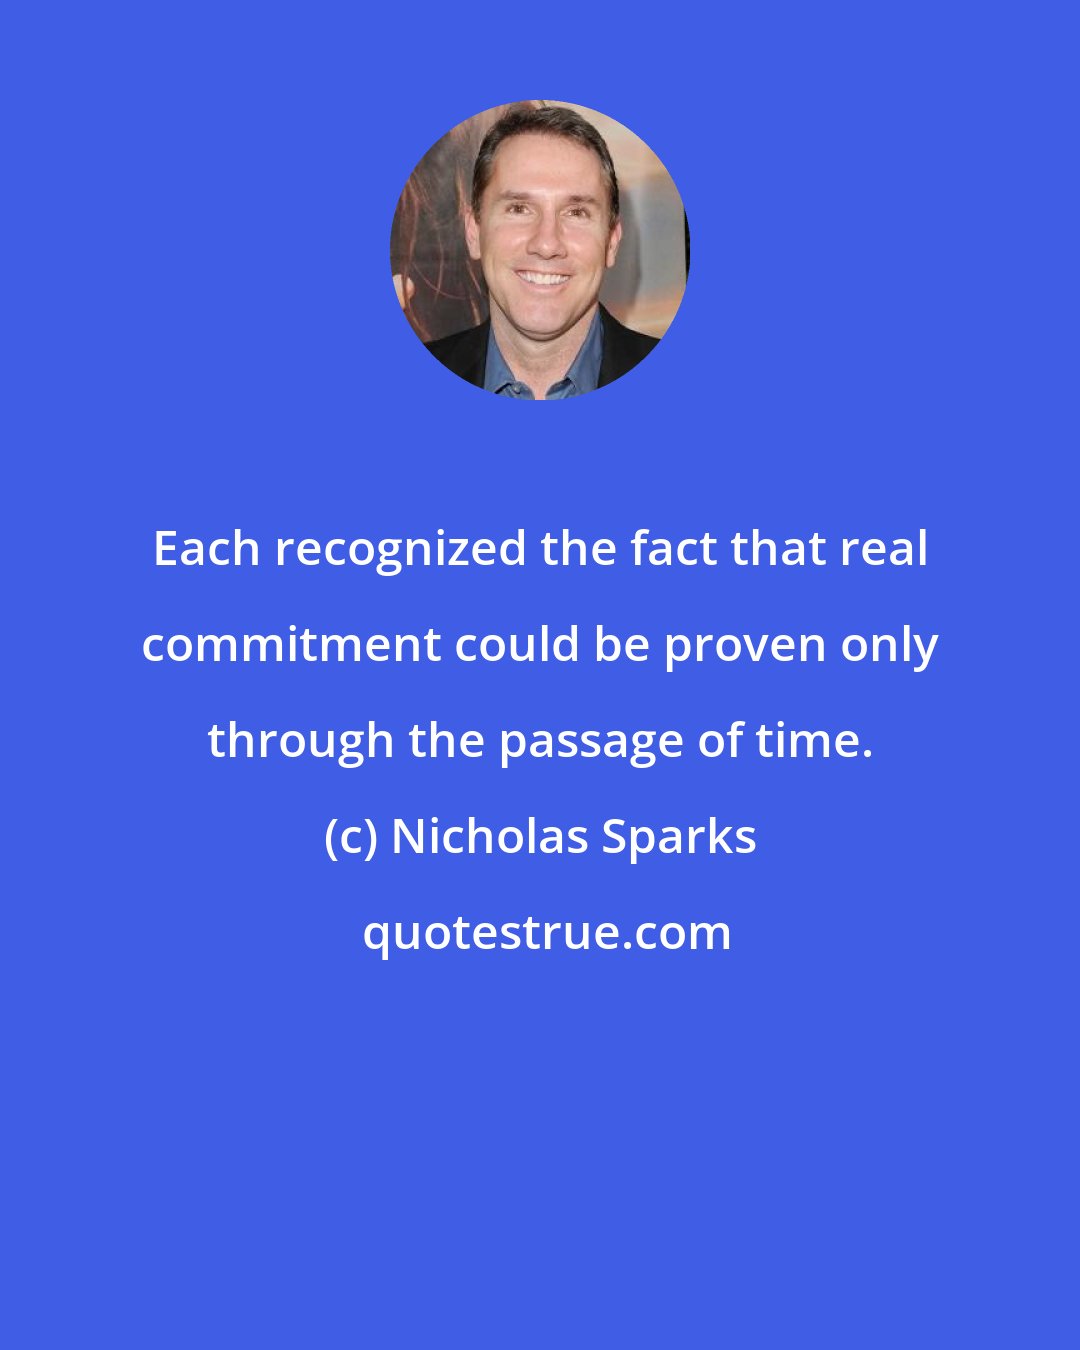 Nicholas Sparks: Each recognized the fact that real commitment could be proven only through the passage of time.